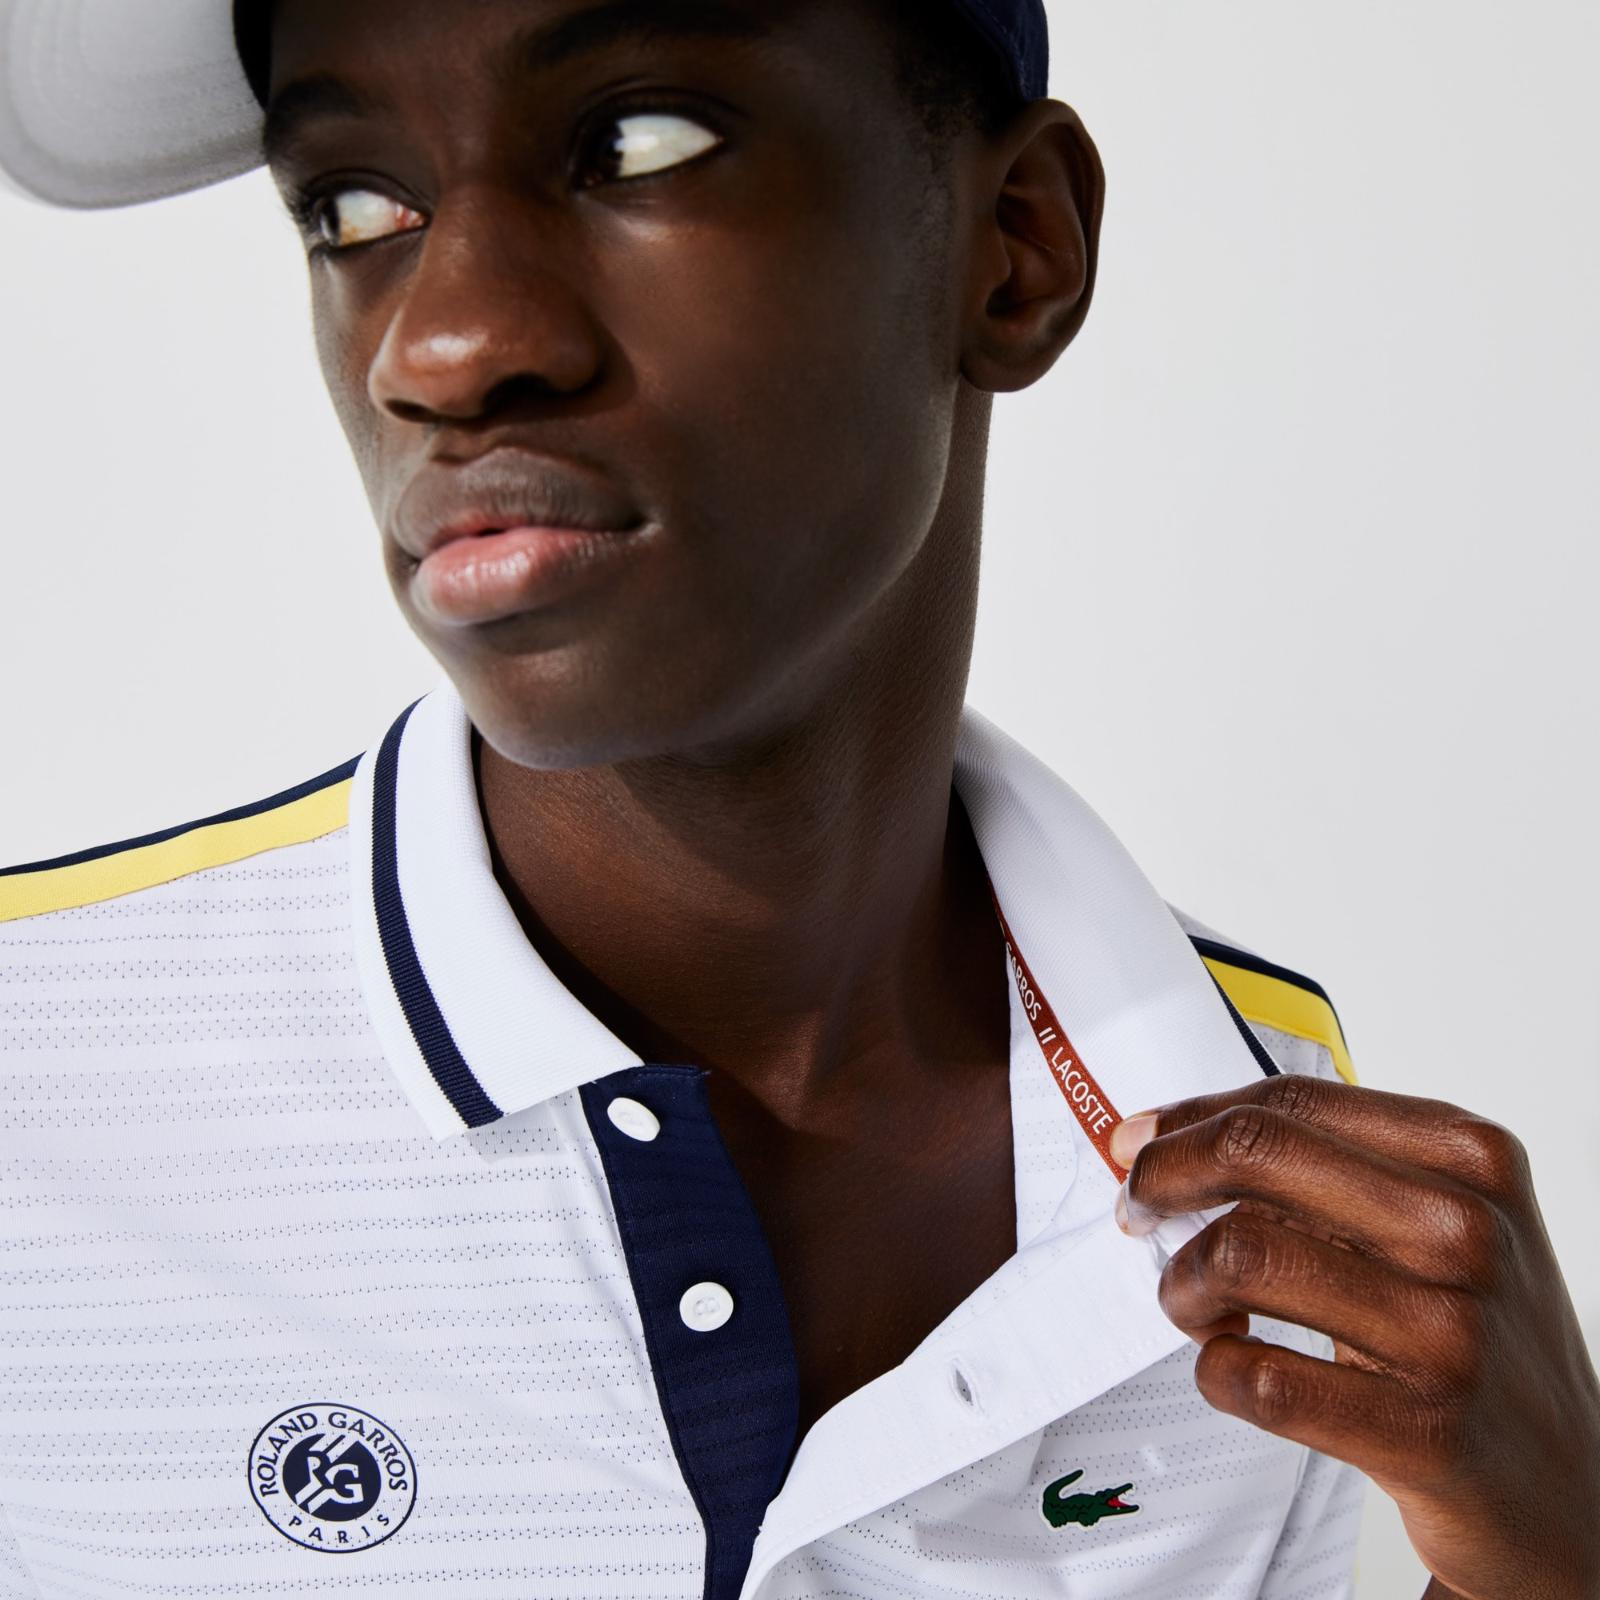 Men’s SPORT French Open Edition Second-Skin Polo Shirt DH9225-51